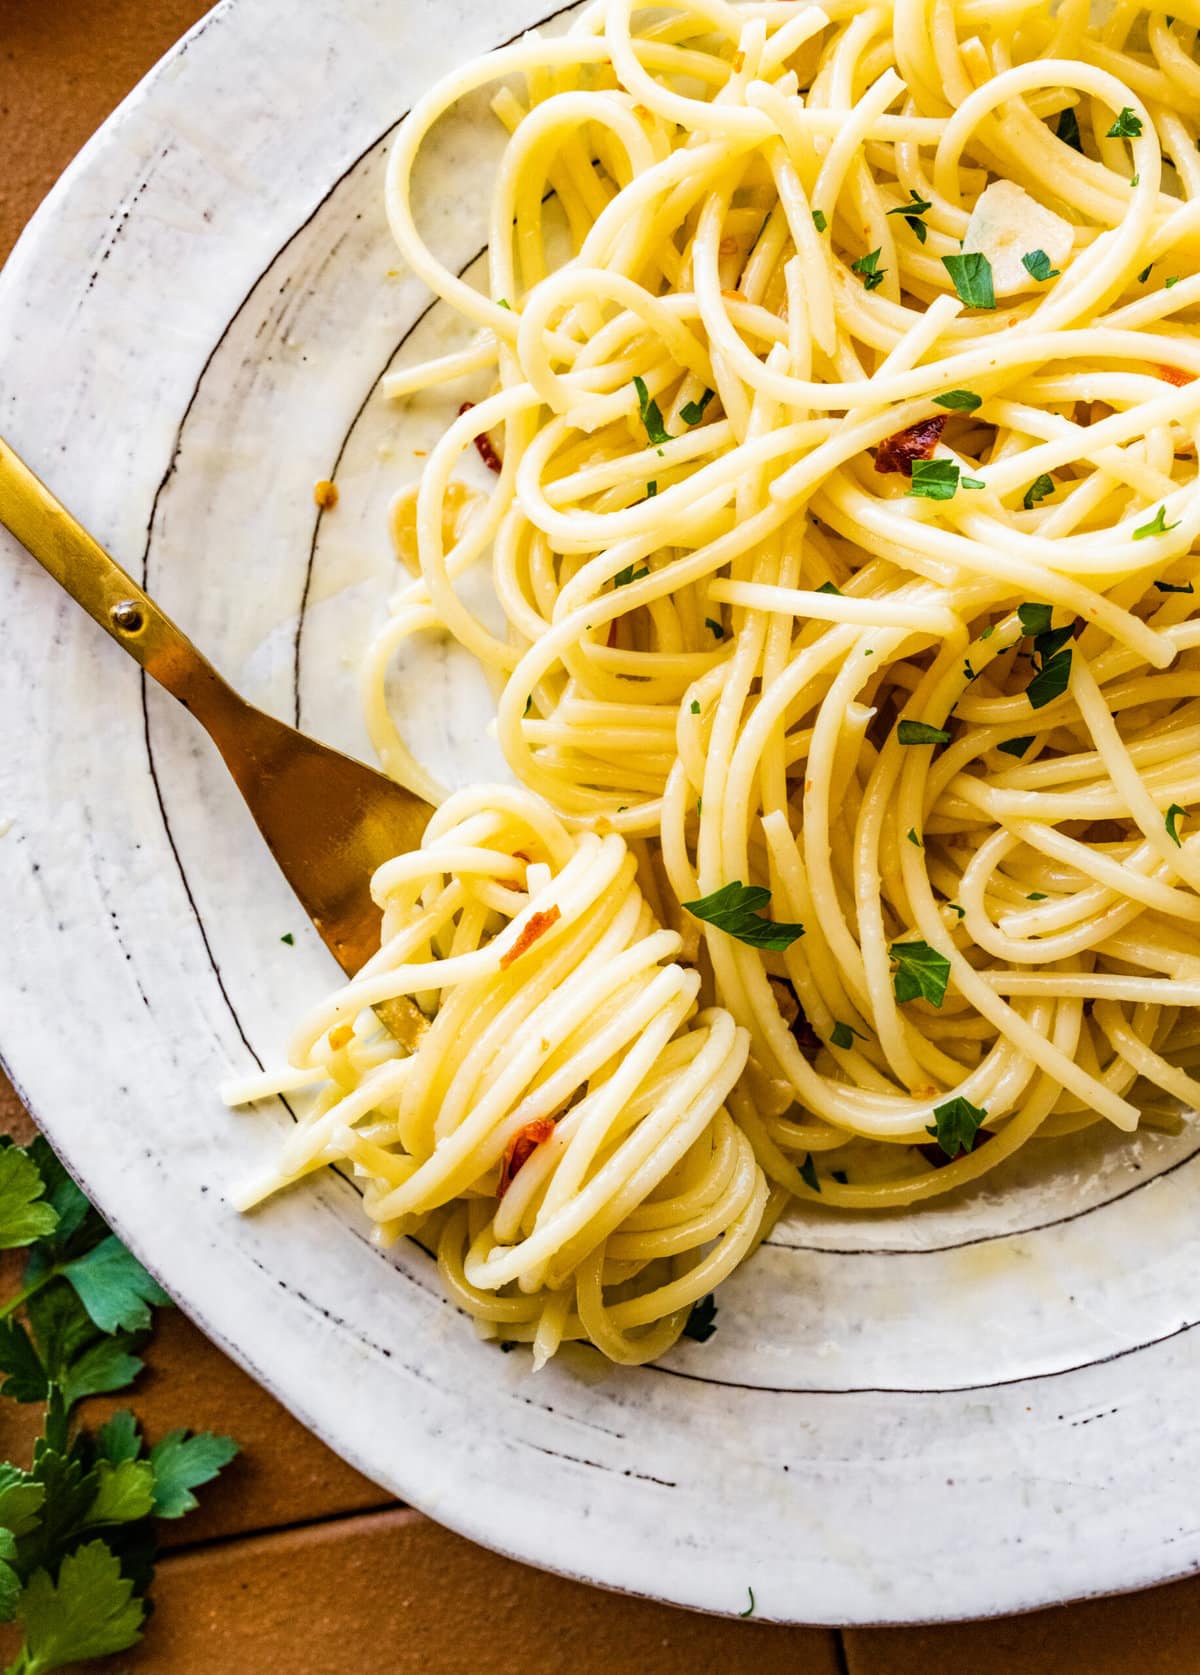 Aglio e olio pasta recipe on a plate ready to eat. Fork twirling the pasta.